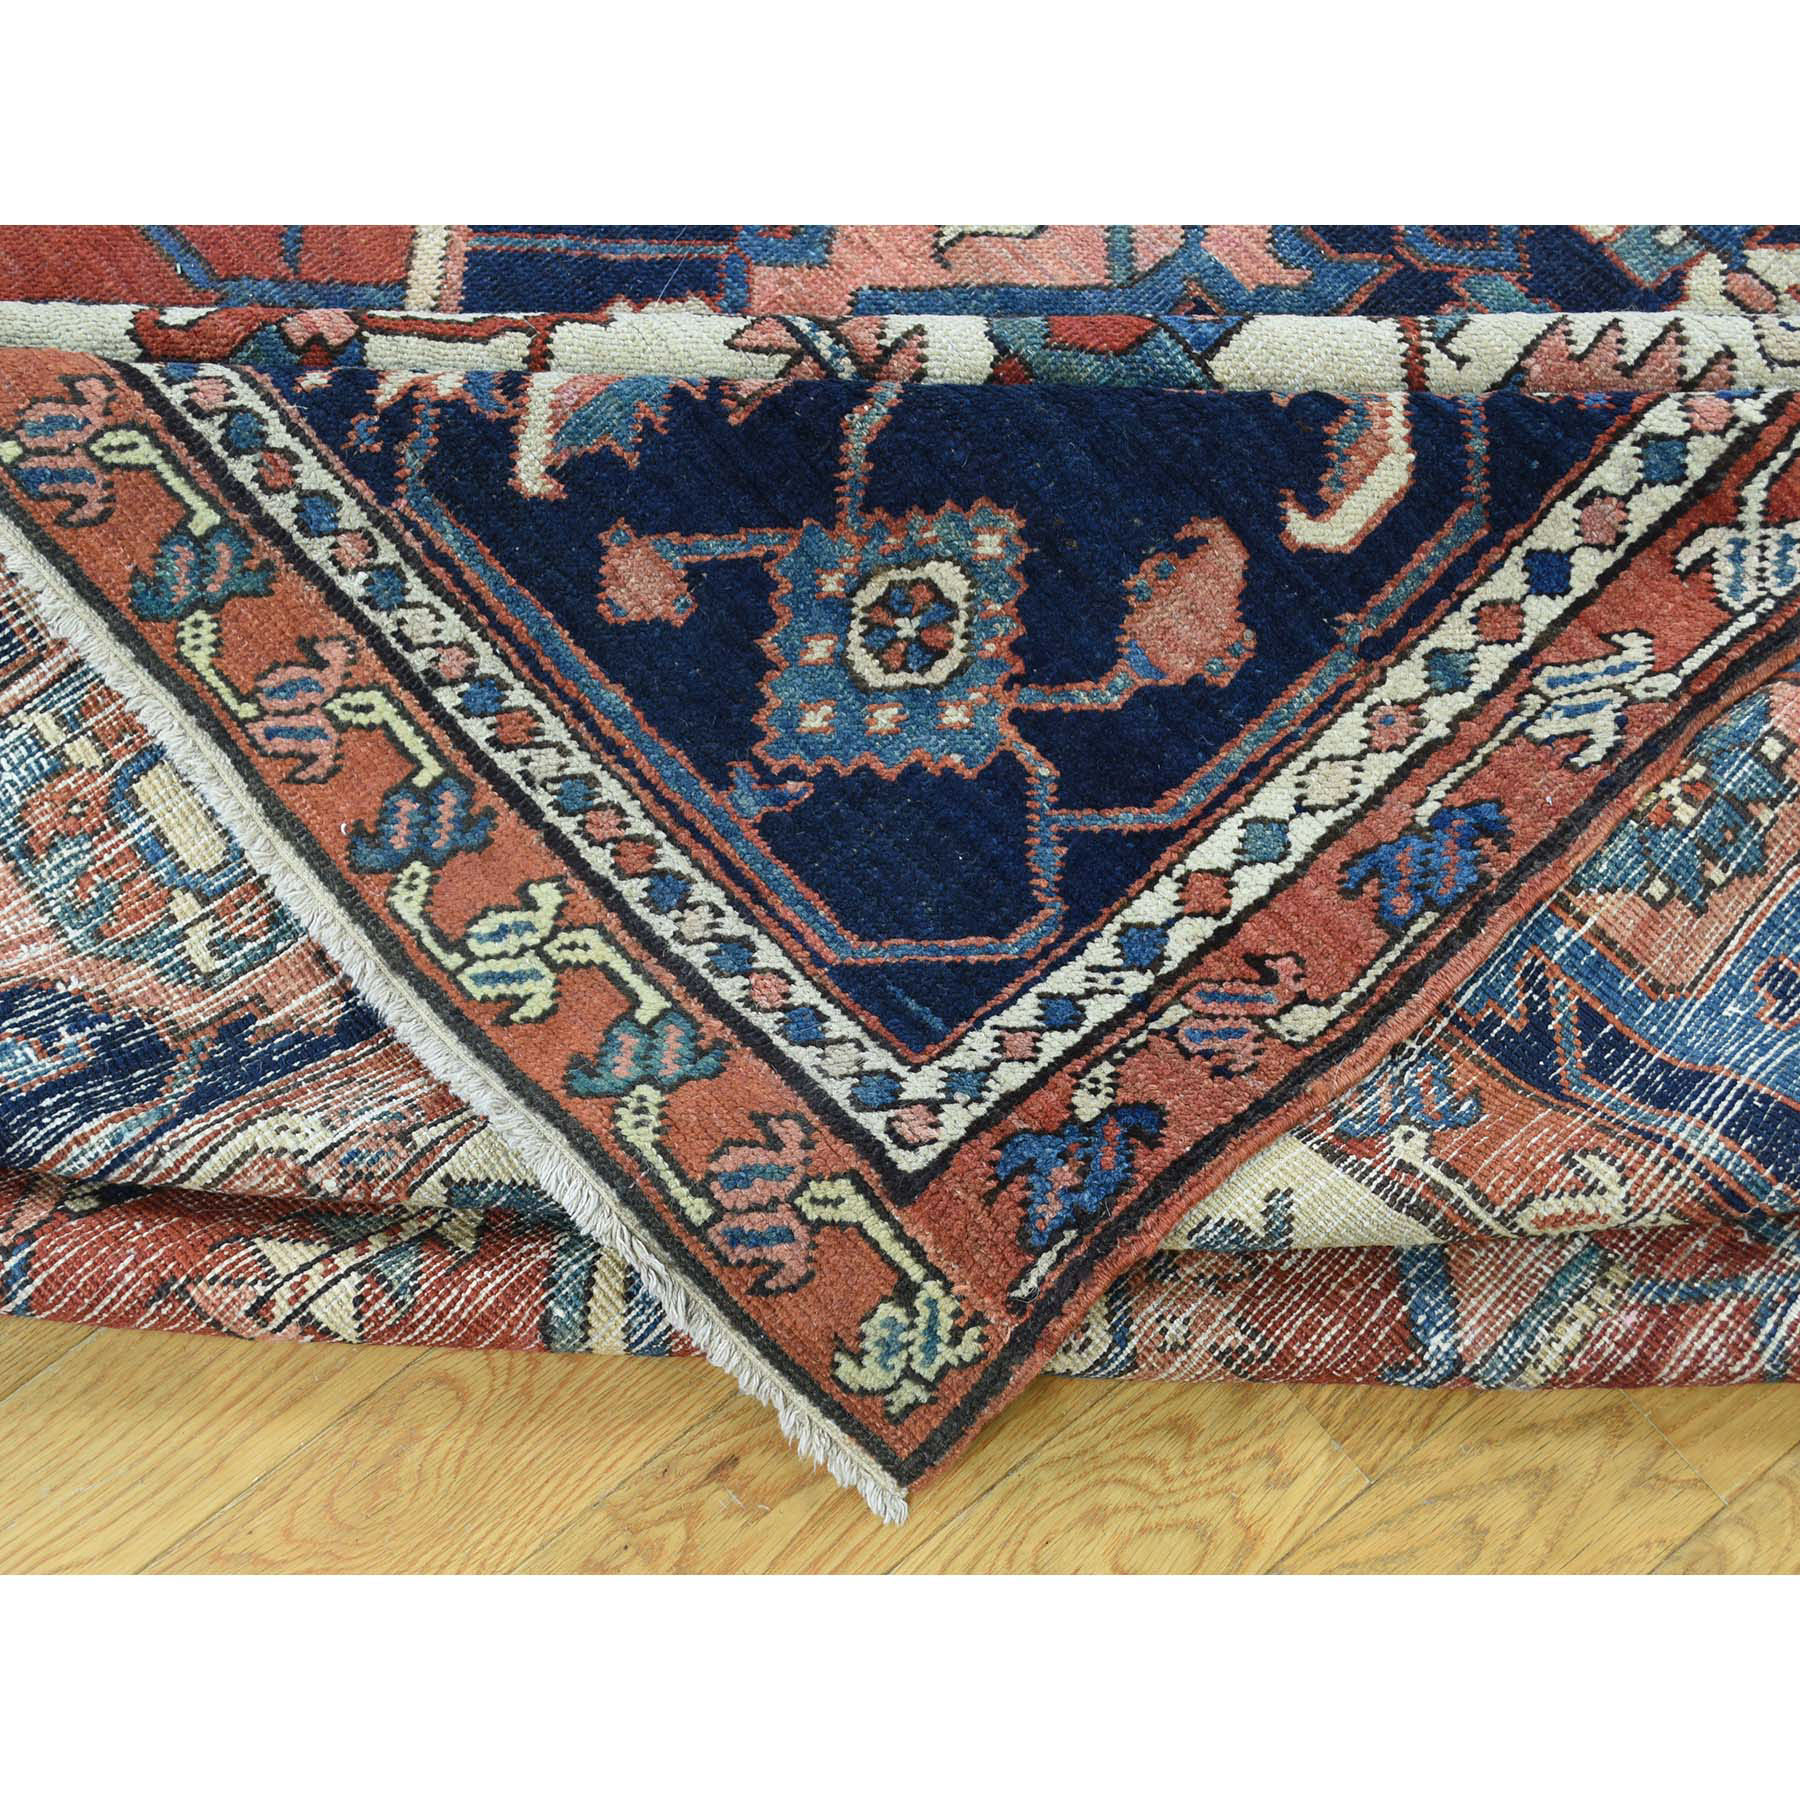 9-10 x13-5  Antique Persian Serapi Good Cond Hand-Knotted Oriental Rug 